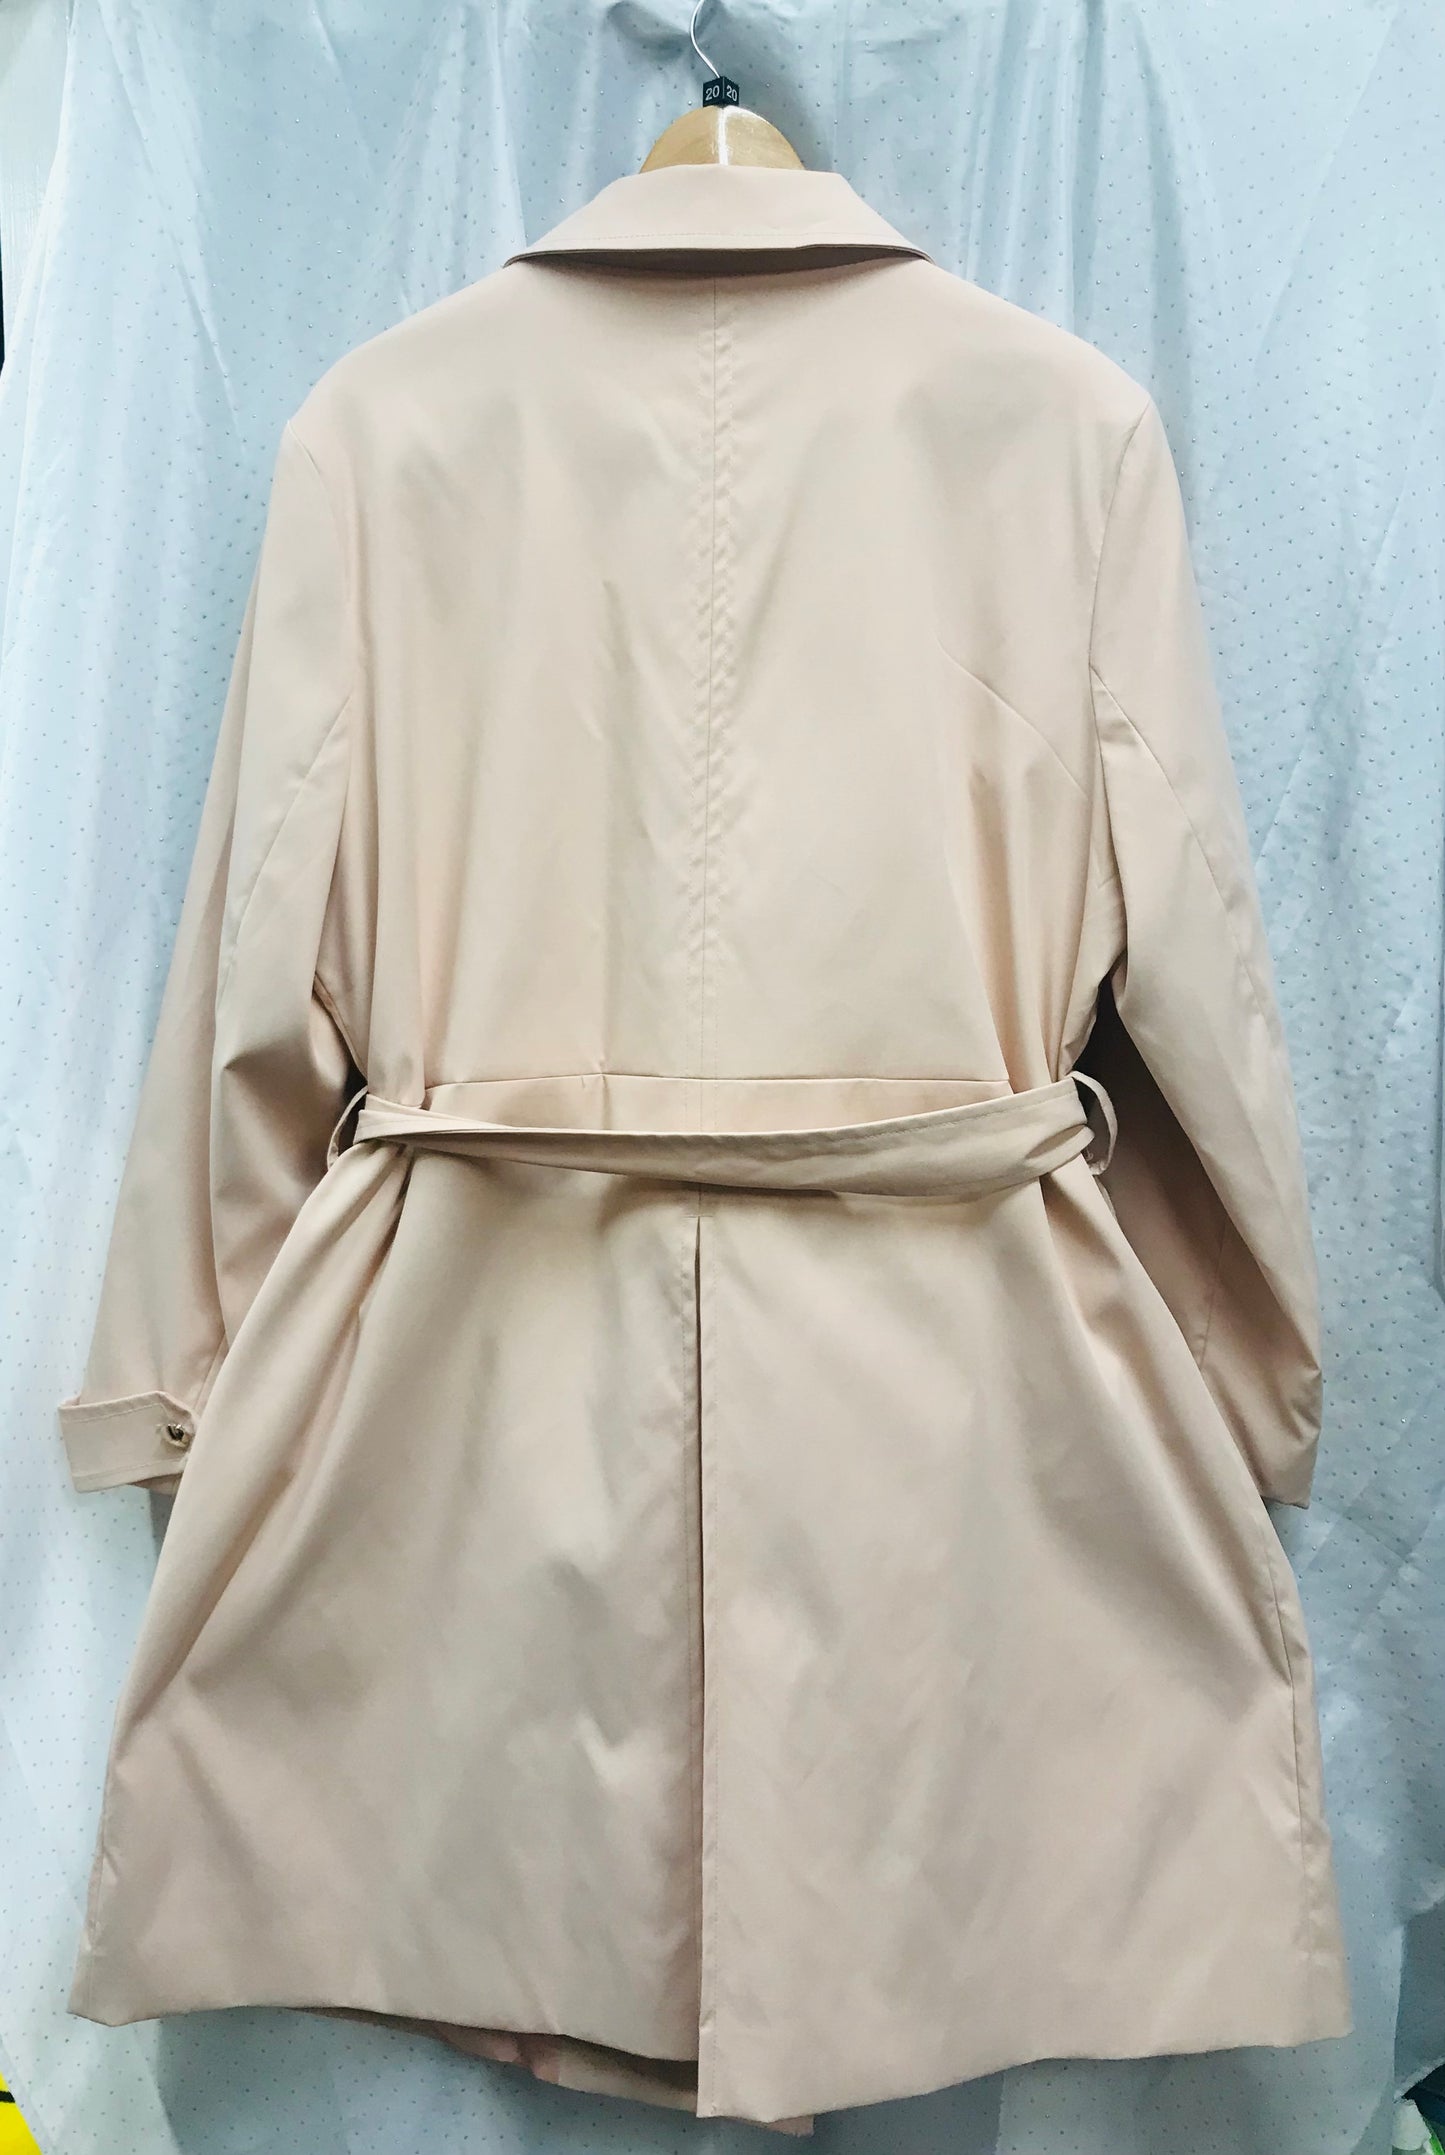 Dorothy Perkins Size 20 3/4 Length Trench Style Coat in Baby Pink/Peach Colour